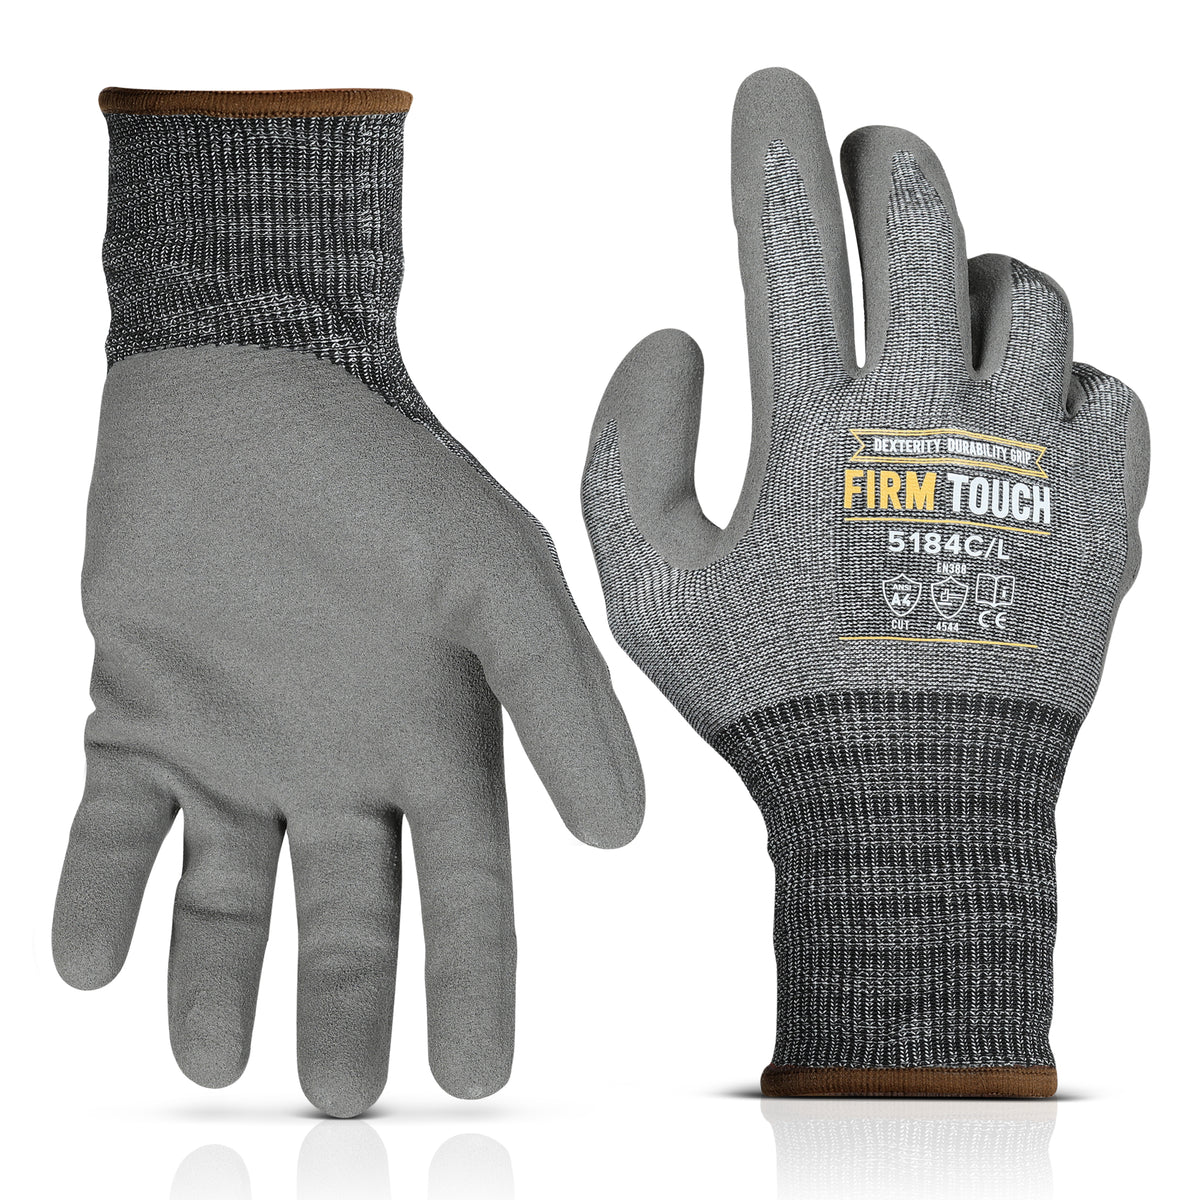 G F 22600l Cutshield Cut Resistant Level 5 Work Gloves Rubber Coated Grey Large